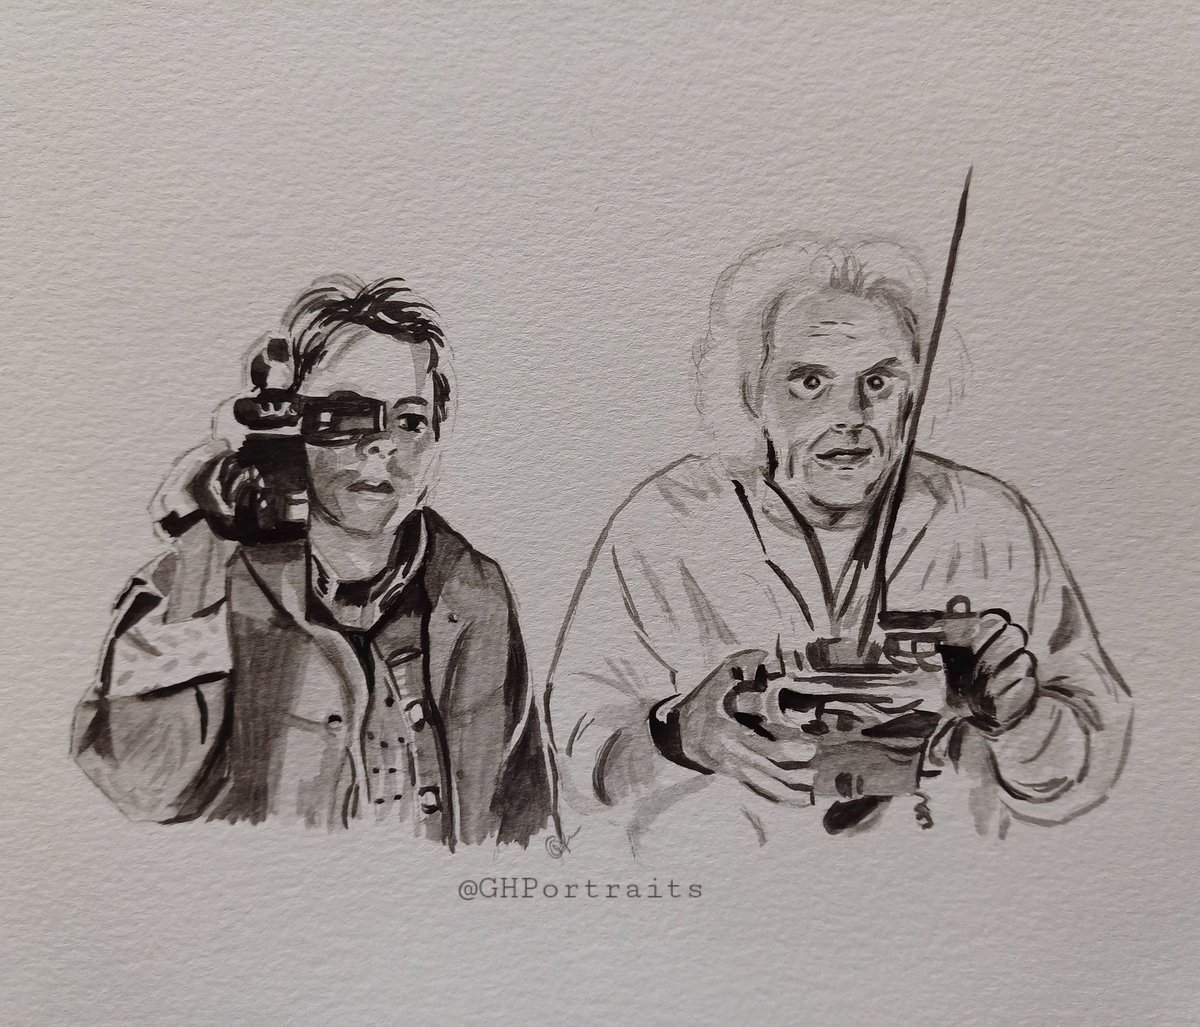 38 years of #BackToTheFuture Had lots of fun doing this little art piece this morning📹☢️🎸⌚️❤️ #MichaelJFox #ChristopherLloyd #bttf #MartyMcfly #DocEmmettBrown #backintime #fanart #movieart #myart